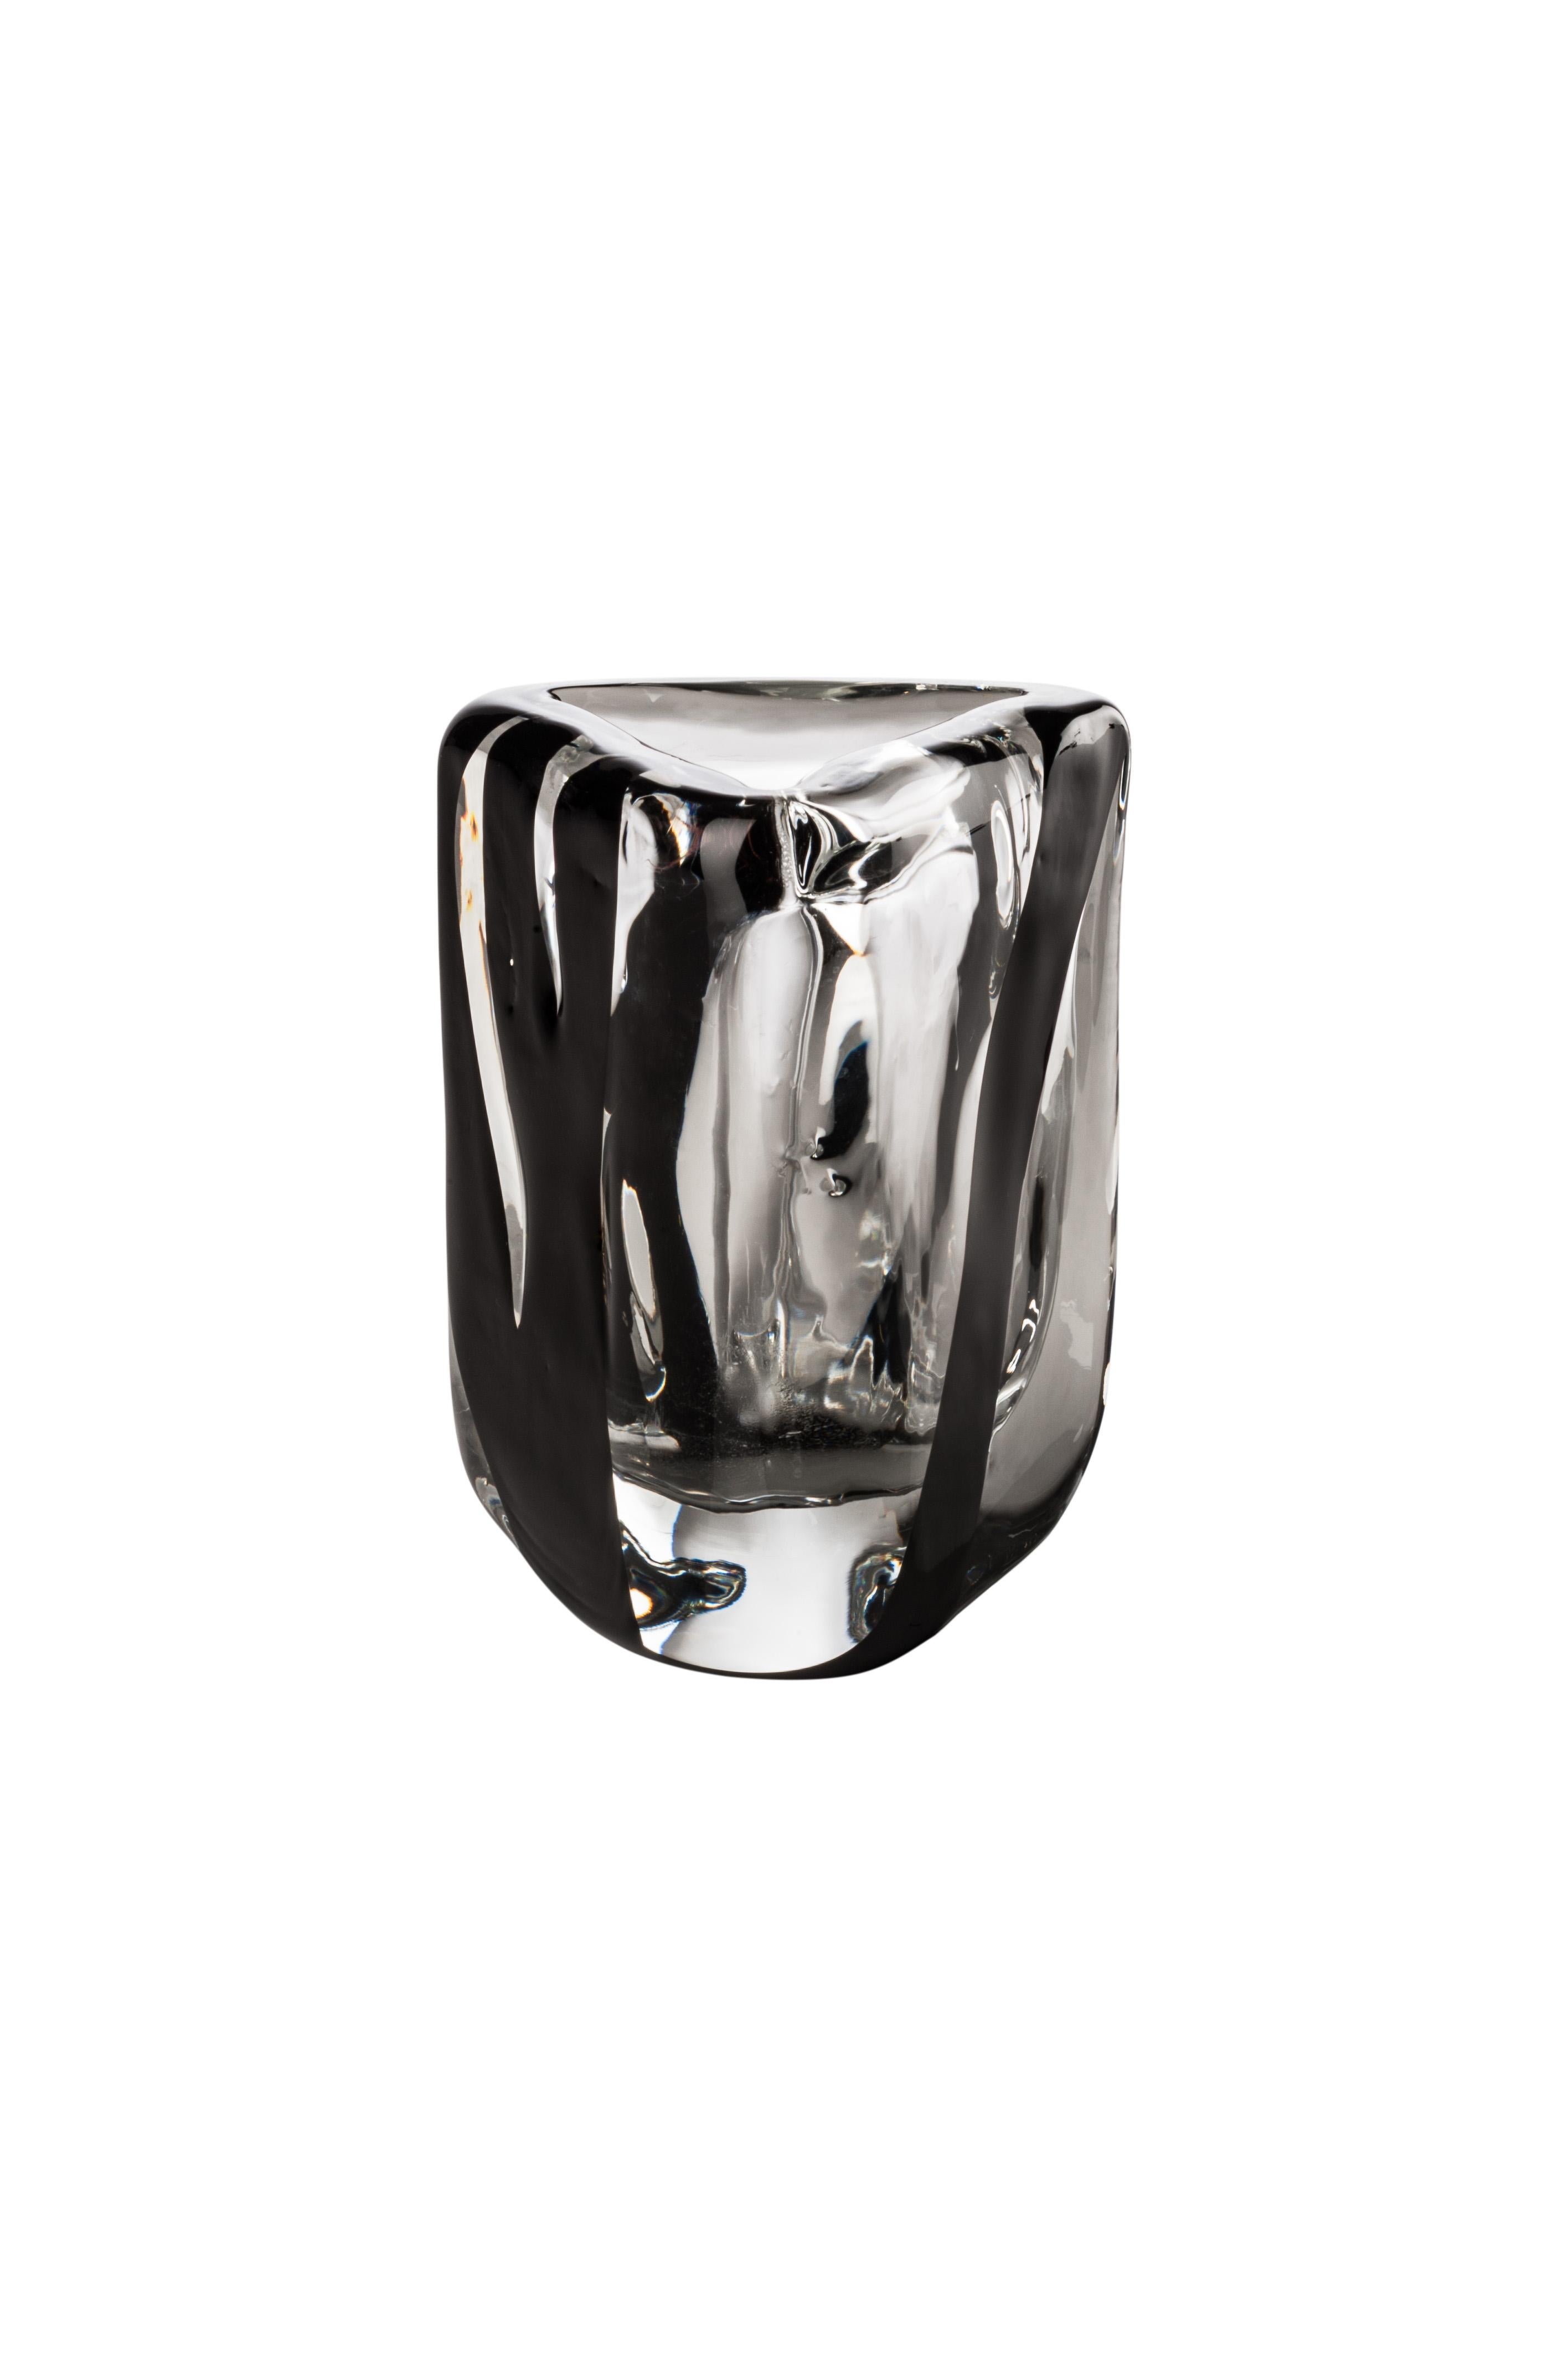 Venini glass vase in transparent crystal with black decoration designed by Peter Marino in 2017. Perfect for indoor home decor as container or statement piece for any room. Also available in other colors on 1stdibs. Limited edition of only 349 works